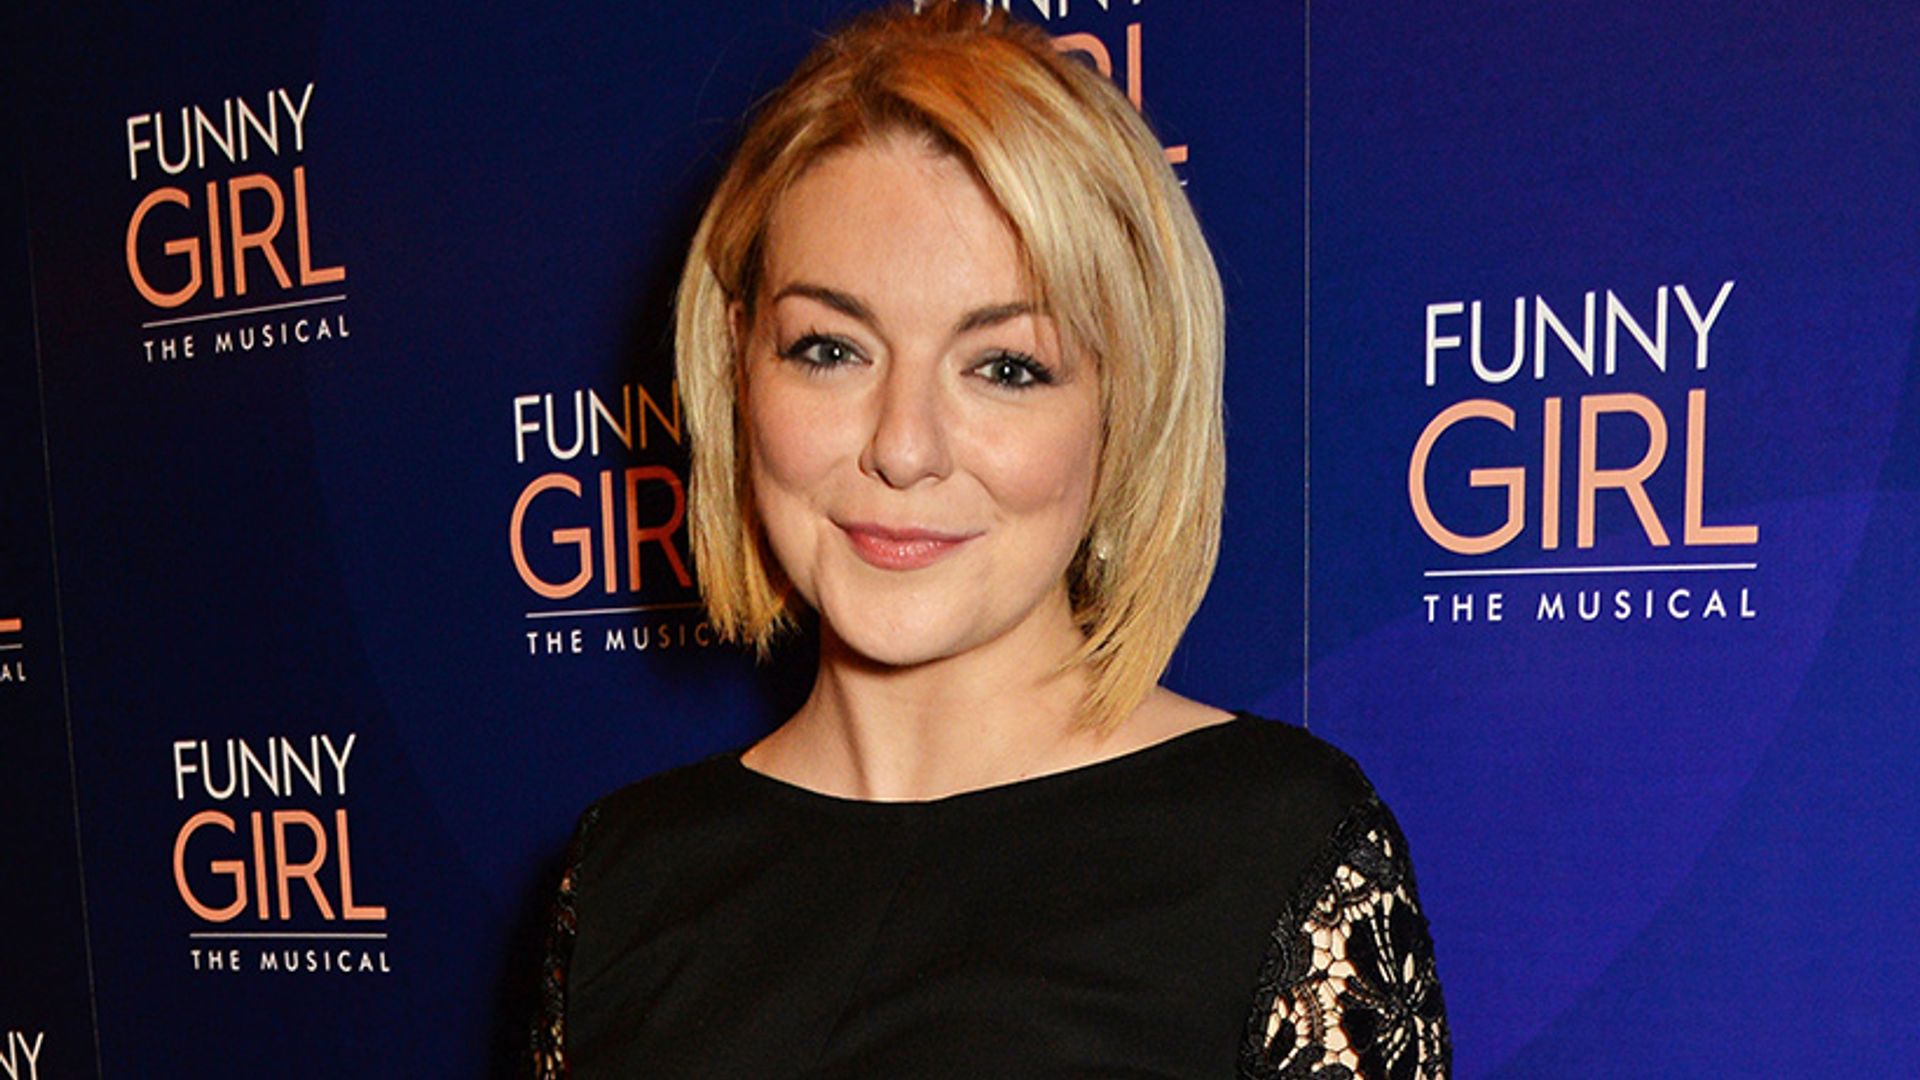 Sheridan Smith has signed a record deal!